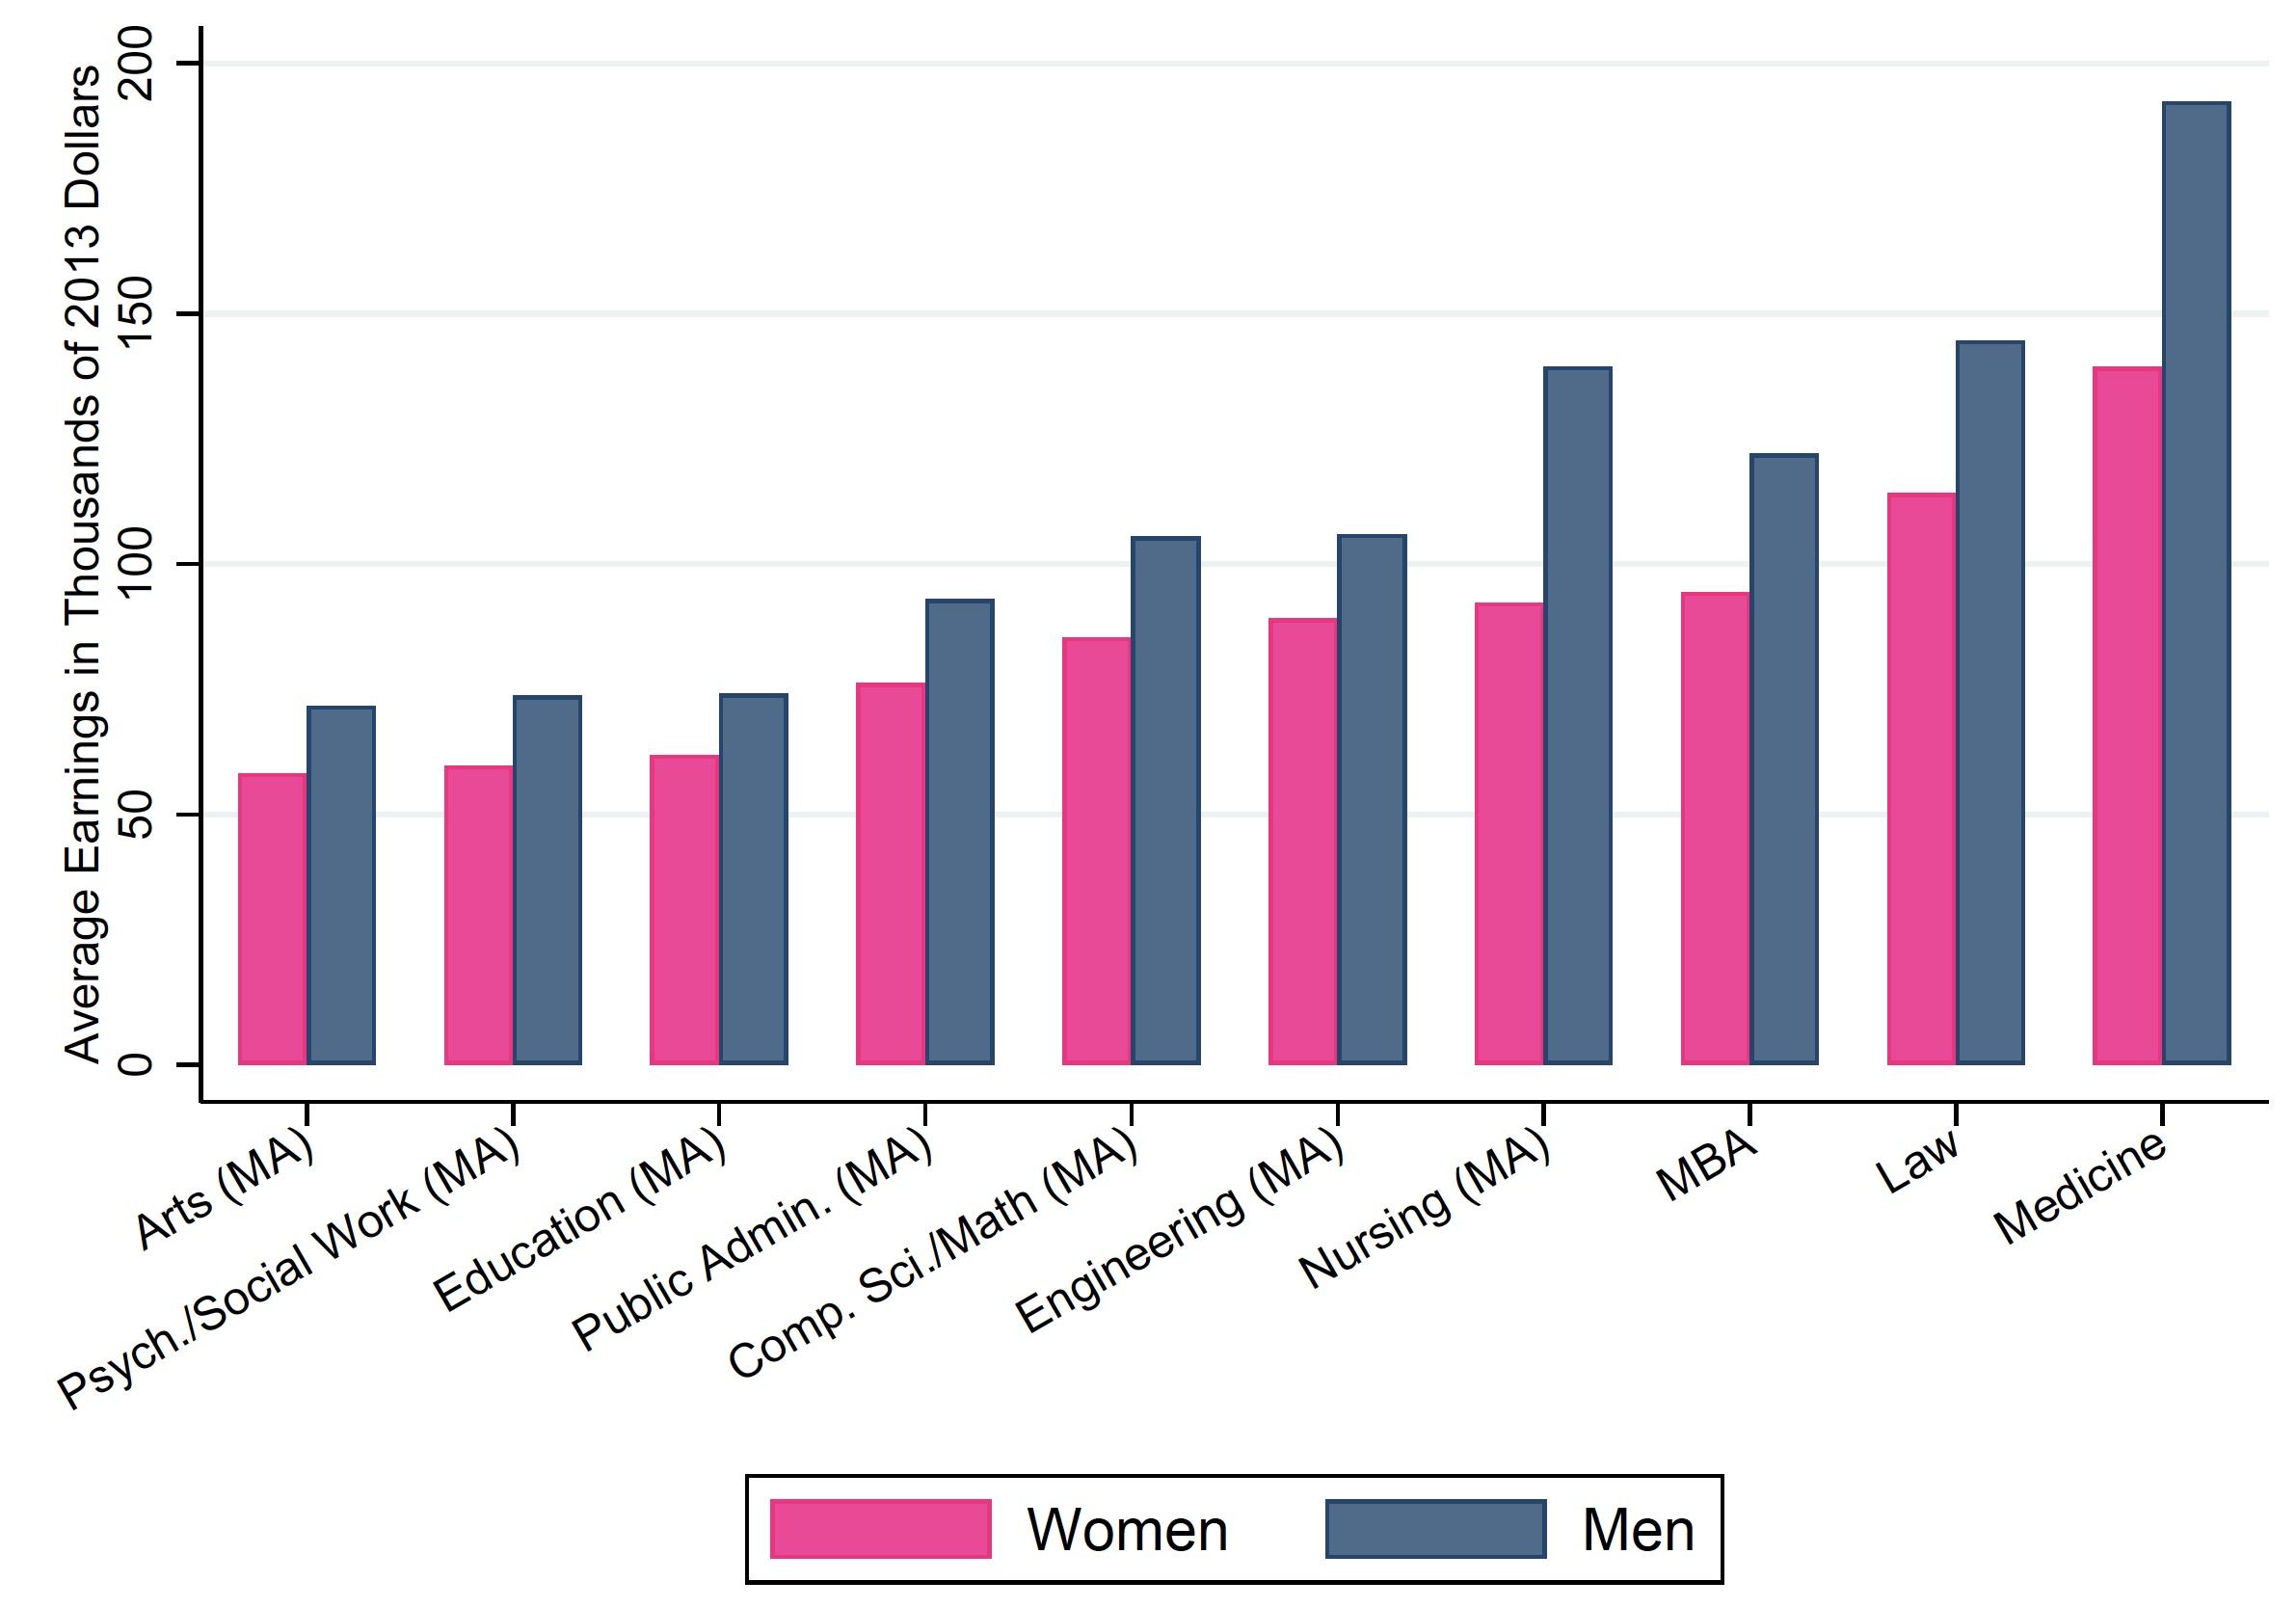 Figure 1 Average earnings by degree and gender